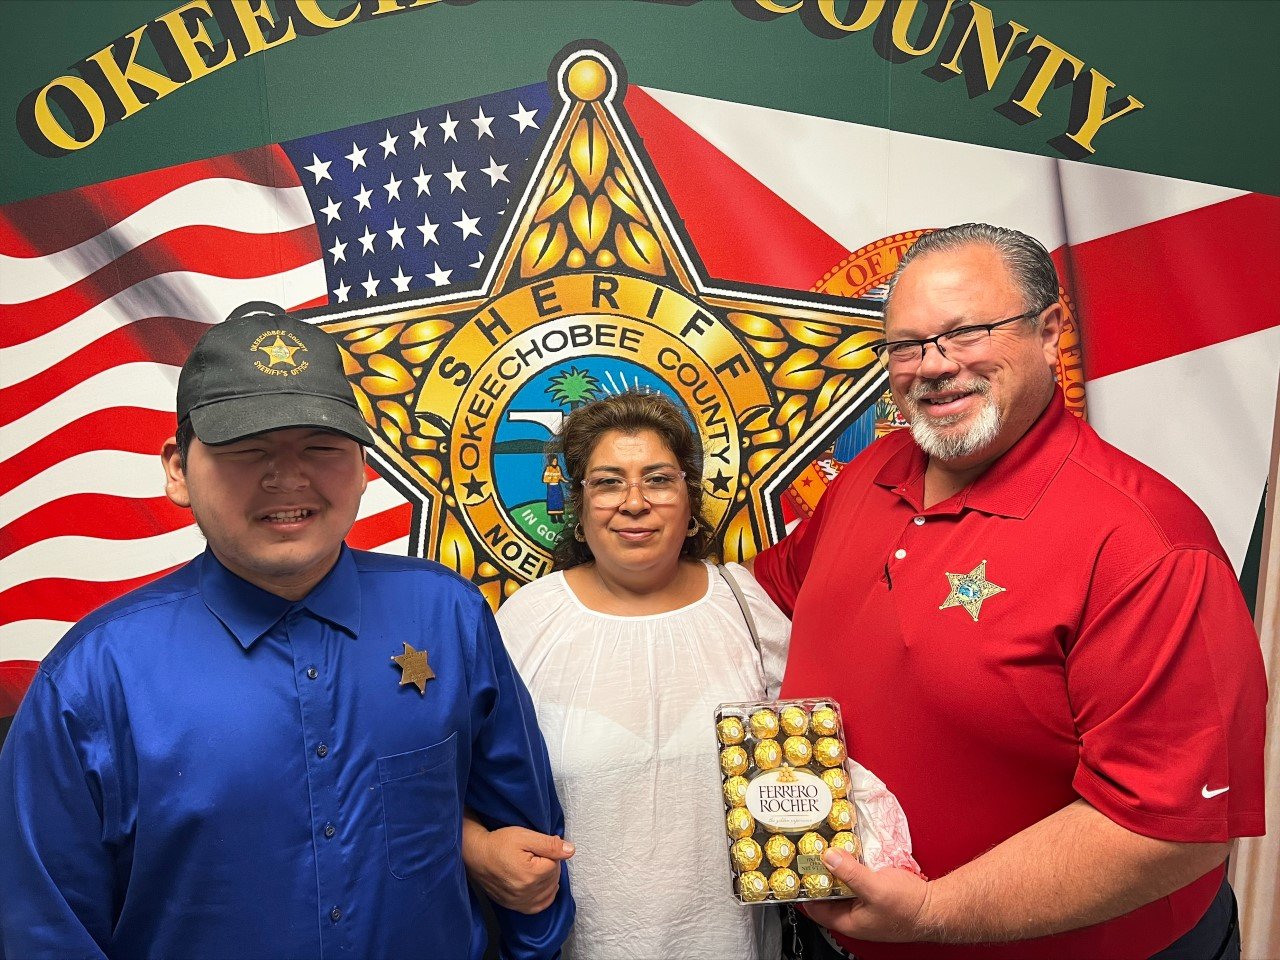 Our newest addition at OCSO Jr. Deputy Angel (with mom in tow), and Sheriff Noel E. Stephen stopped for a quick picture.

Angel has his badge and cuffs and is ready to serve and protect. Angel shows that he is willing to make a difference even with him being visually impaired.